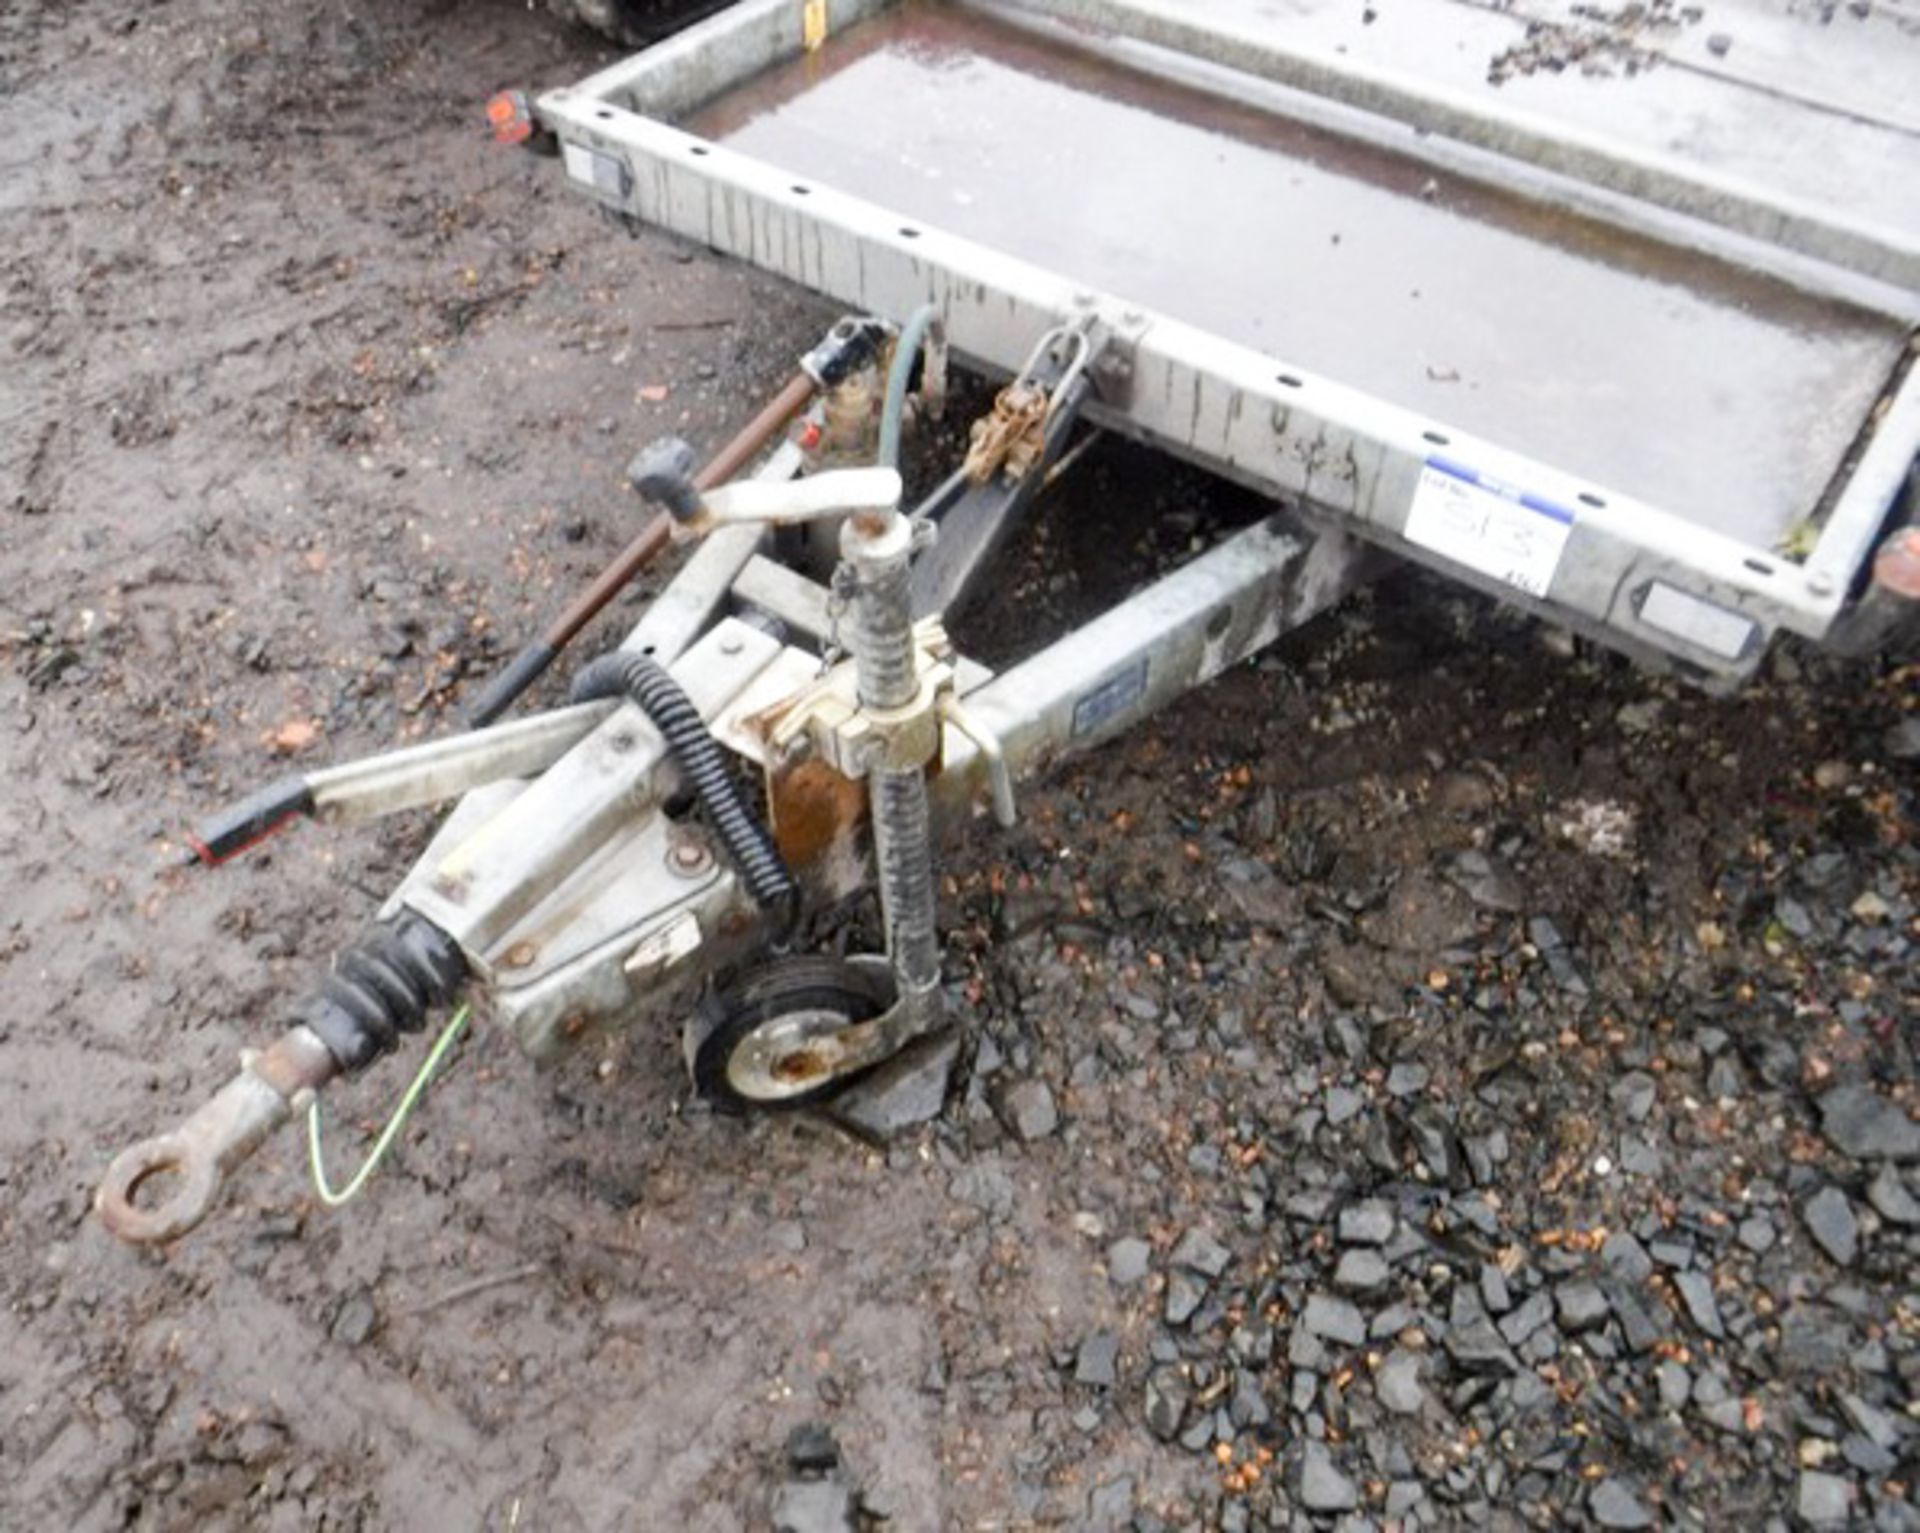 BRIAN JAMES 3M X 1.5M TWIN AXLE TILTING TRAILER FOR WOODCHIPPER OR OTHER SMALL PLANT, S/N 210178017-